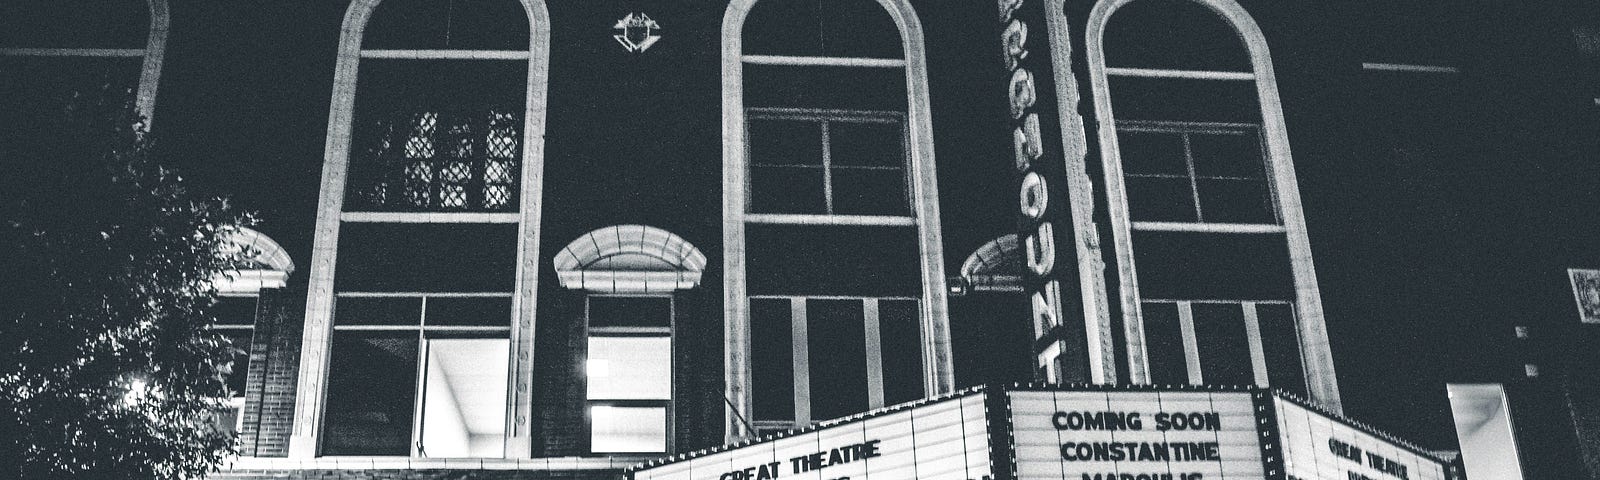 Black and white photo of Paramount theater sign reading “presents Singing in the Rain” with show times.